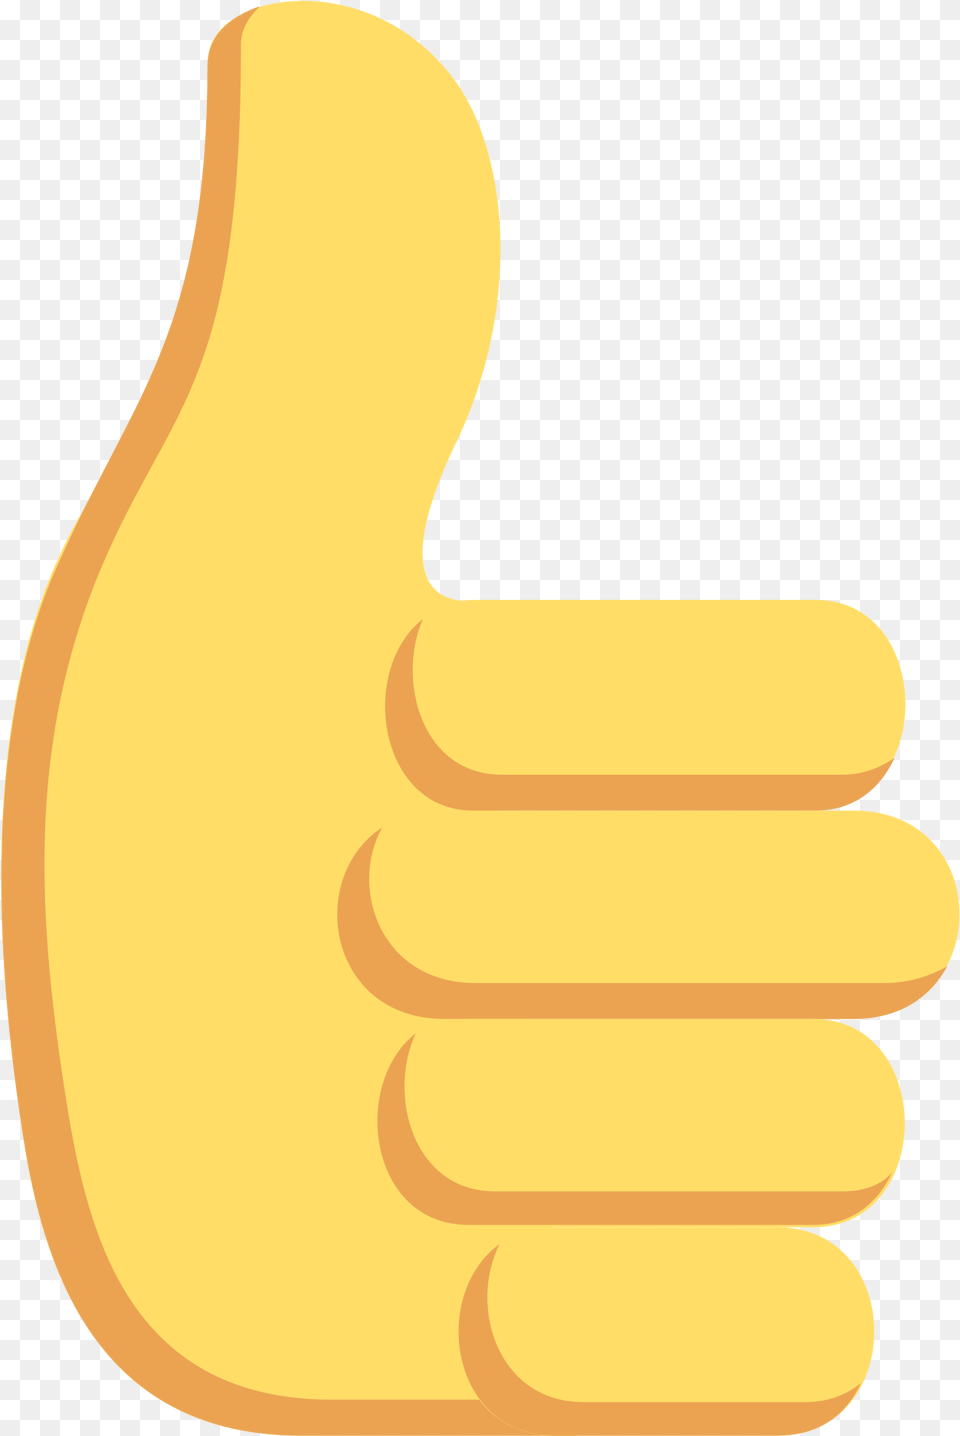 Hand Emoji Clipart Discord Thumbs Up Emoji Discord, Thumbs Up, Body Part, Finger, Person Png